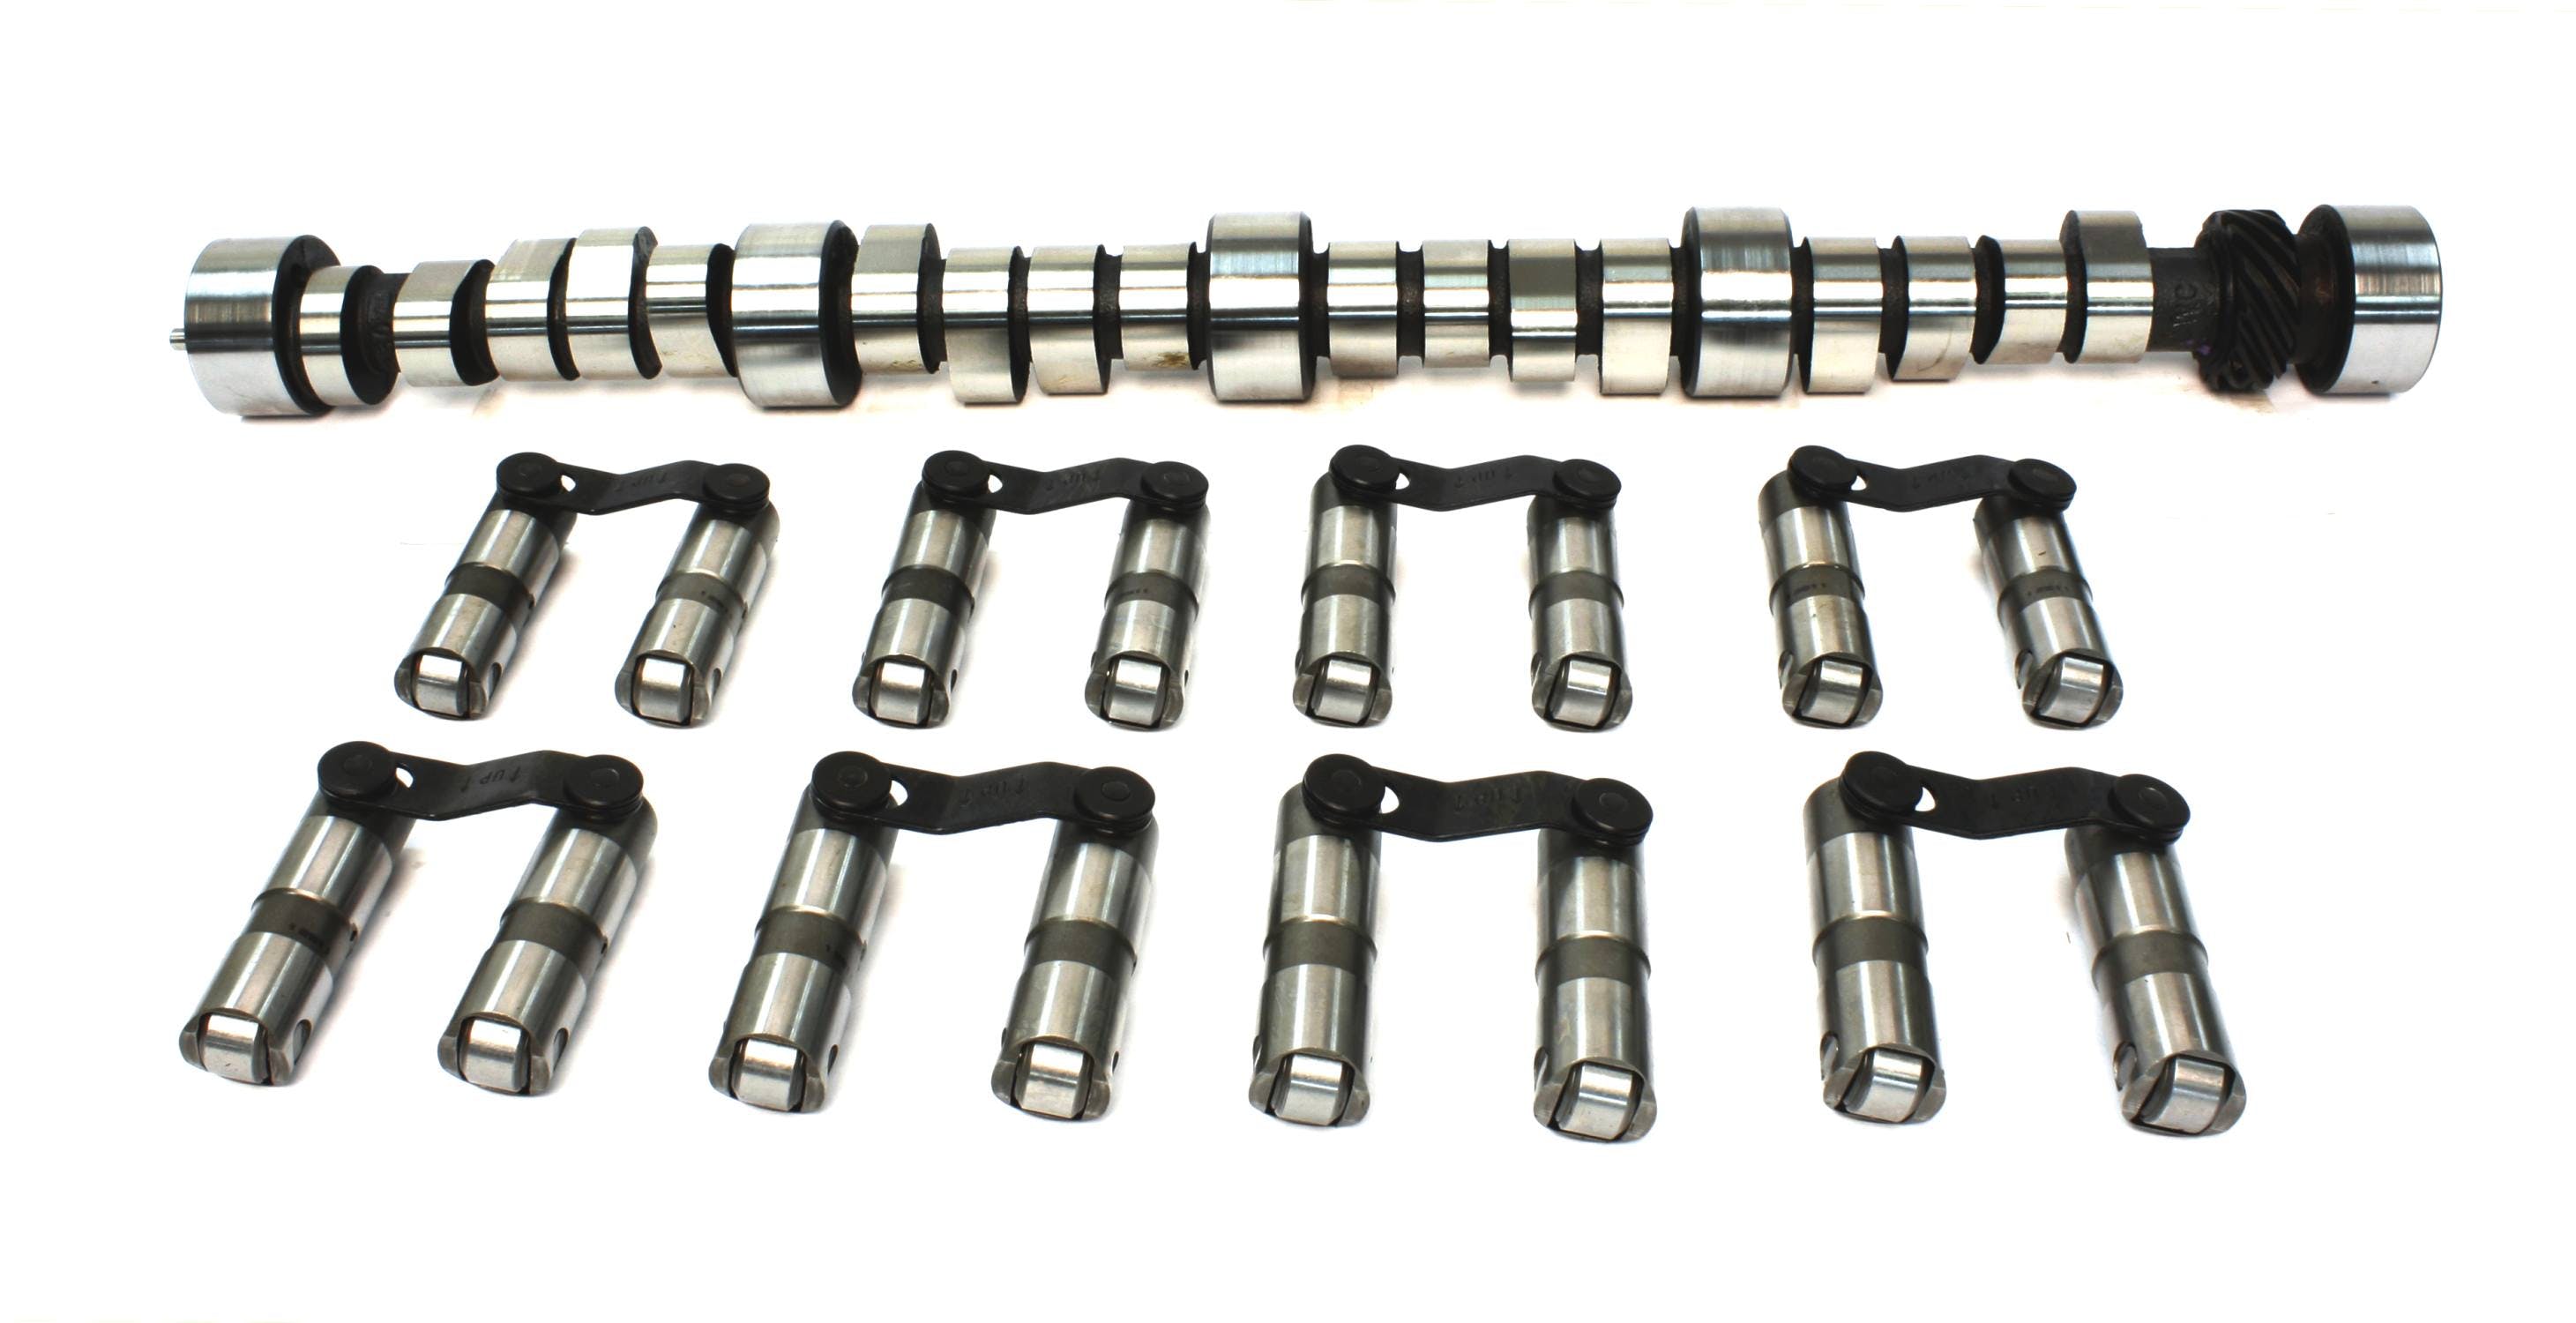 Competition Cams CL11-408-8 XE 206/212 HYDRAULIC ROLLER CAM/LIFTER KIT CHEVROLET BIG BLOCK 396-454